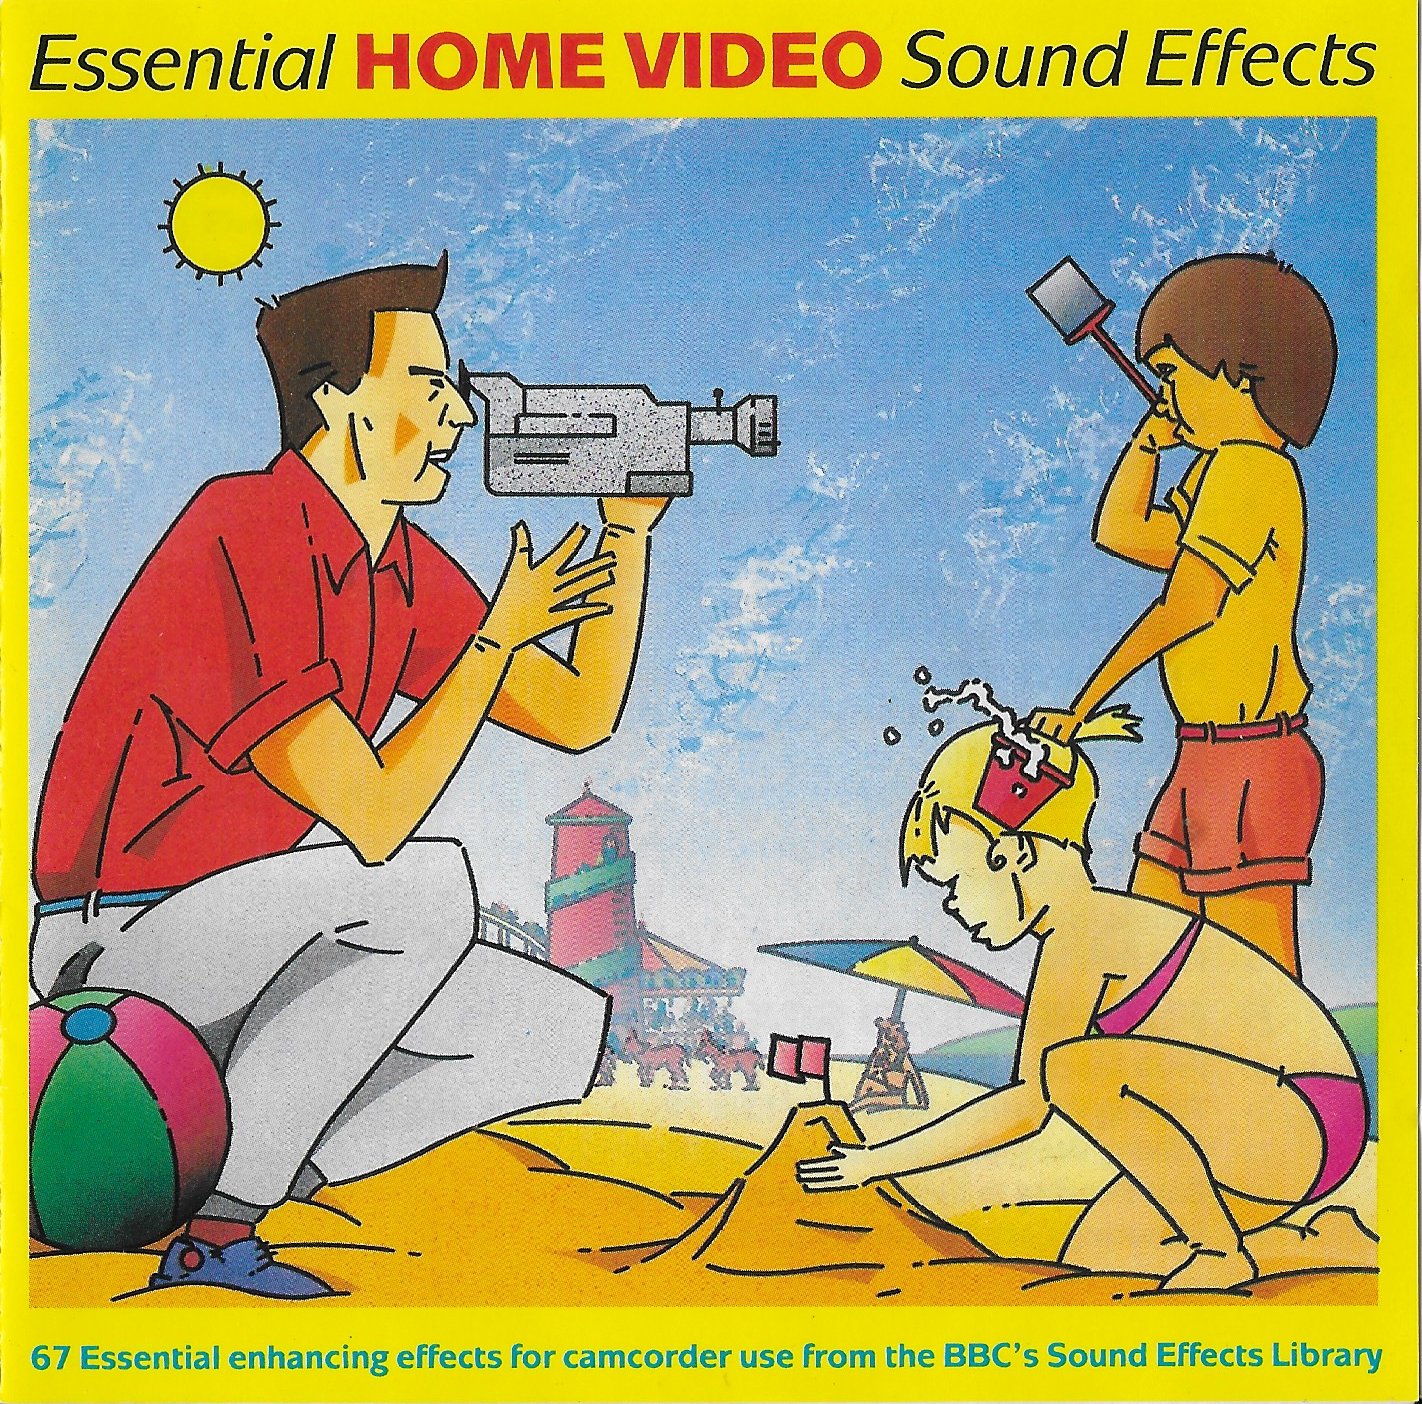 Picture of Essential home video sound effects by artist Various from the BBC cds - Records and Tapes library